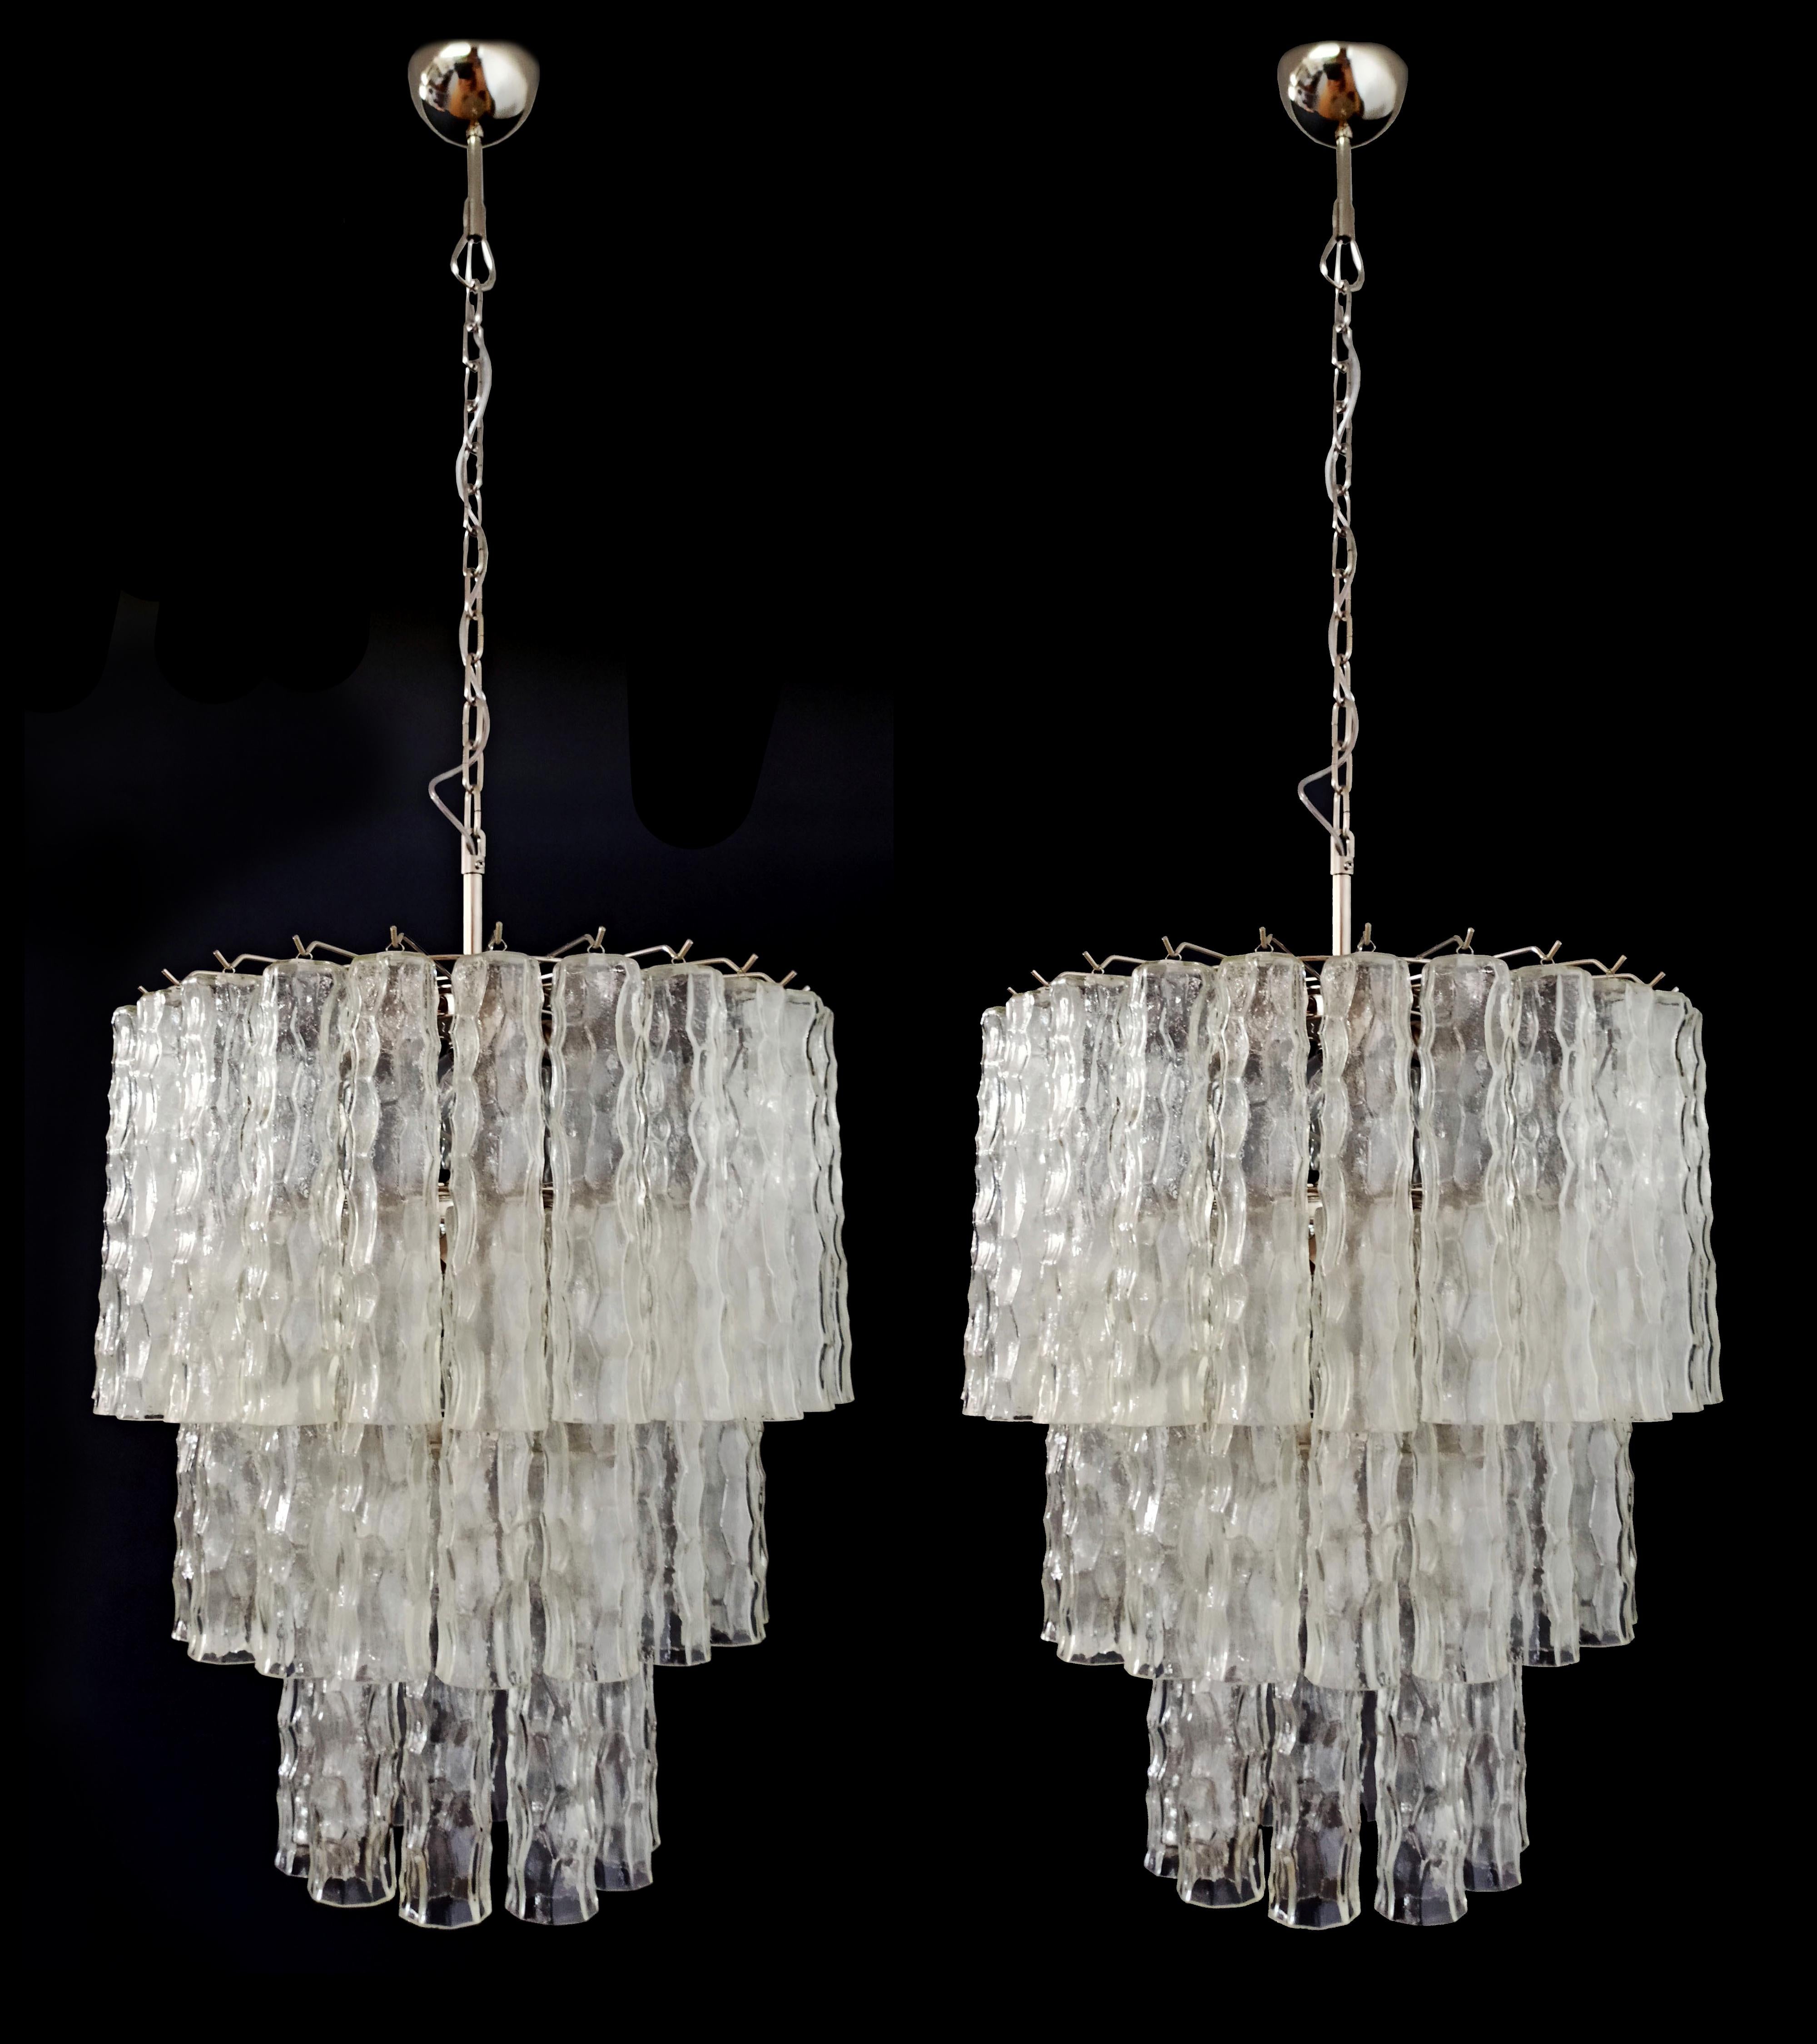 Pair of vintage Italian Murano glass chandeliers and nickel-plated metal structure. The shiny nickel armor supports 52 large clear glass tubes that have a slightly hammered effect to create an impressive 